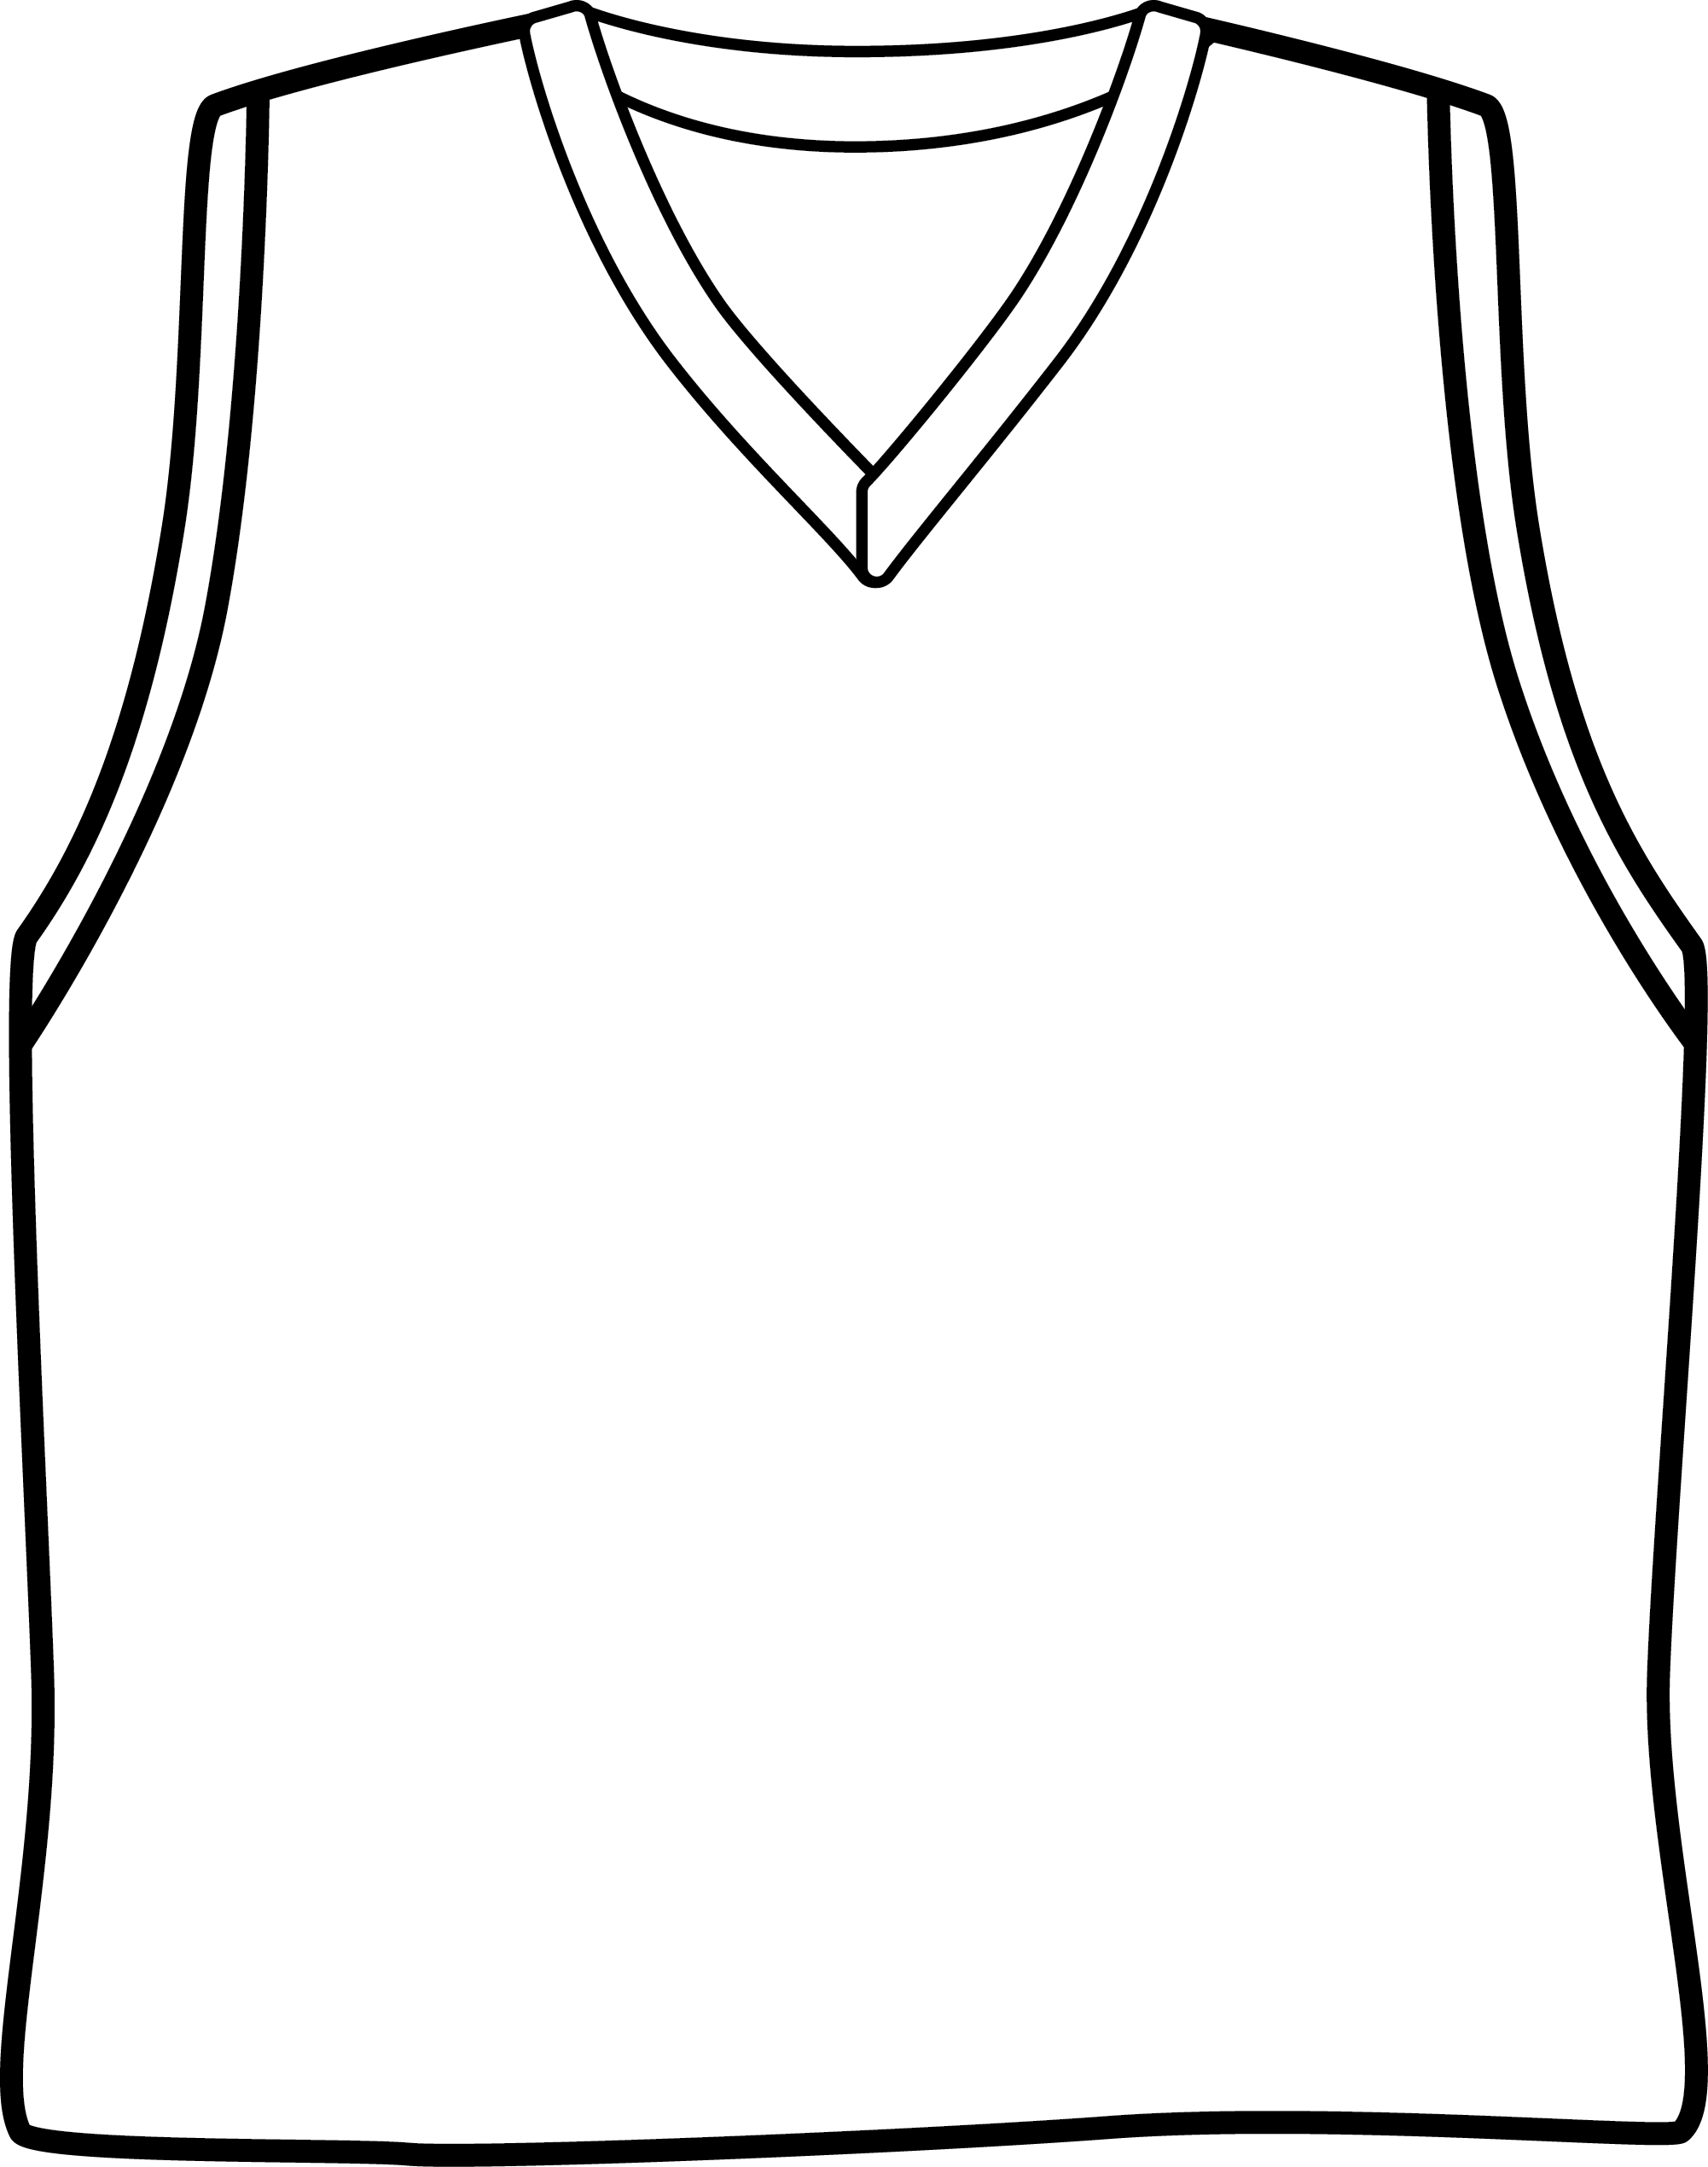 Blank Basketball Jersey Template - Clipart library - Clipart library